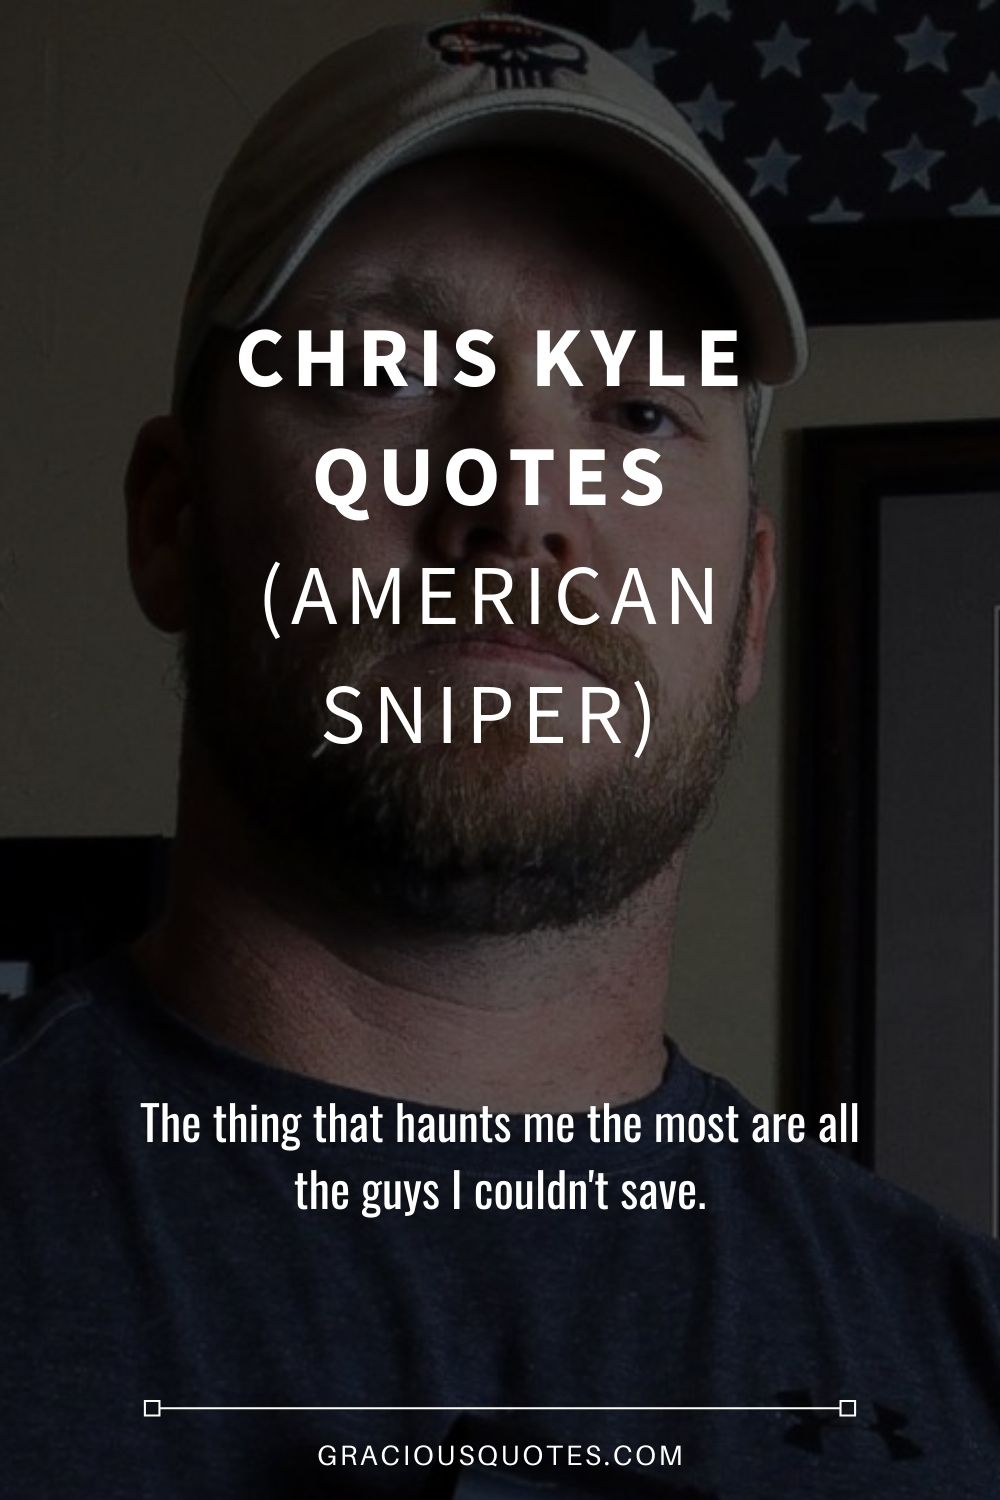 Chris Kyle Quotes (AMERICAN SNIPER) - Gracious Quotes